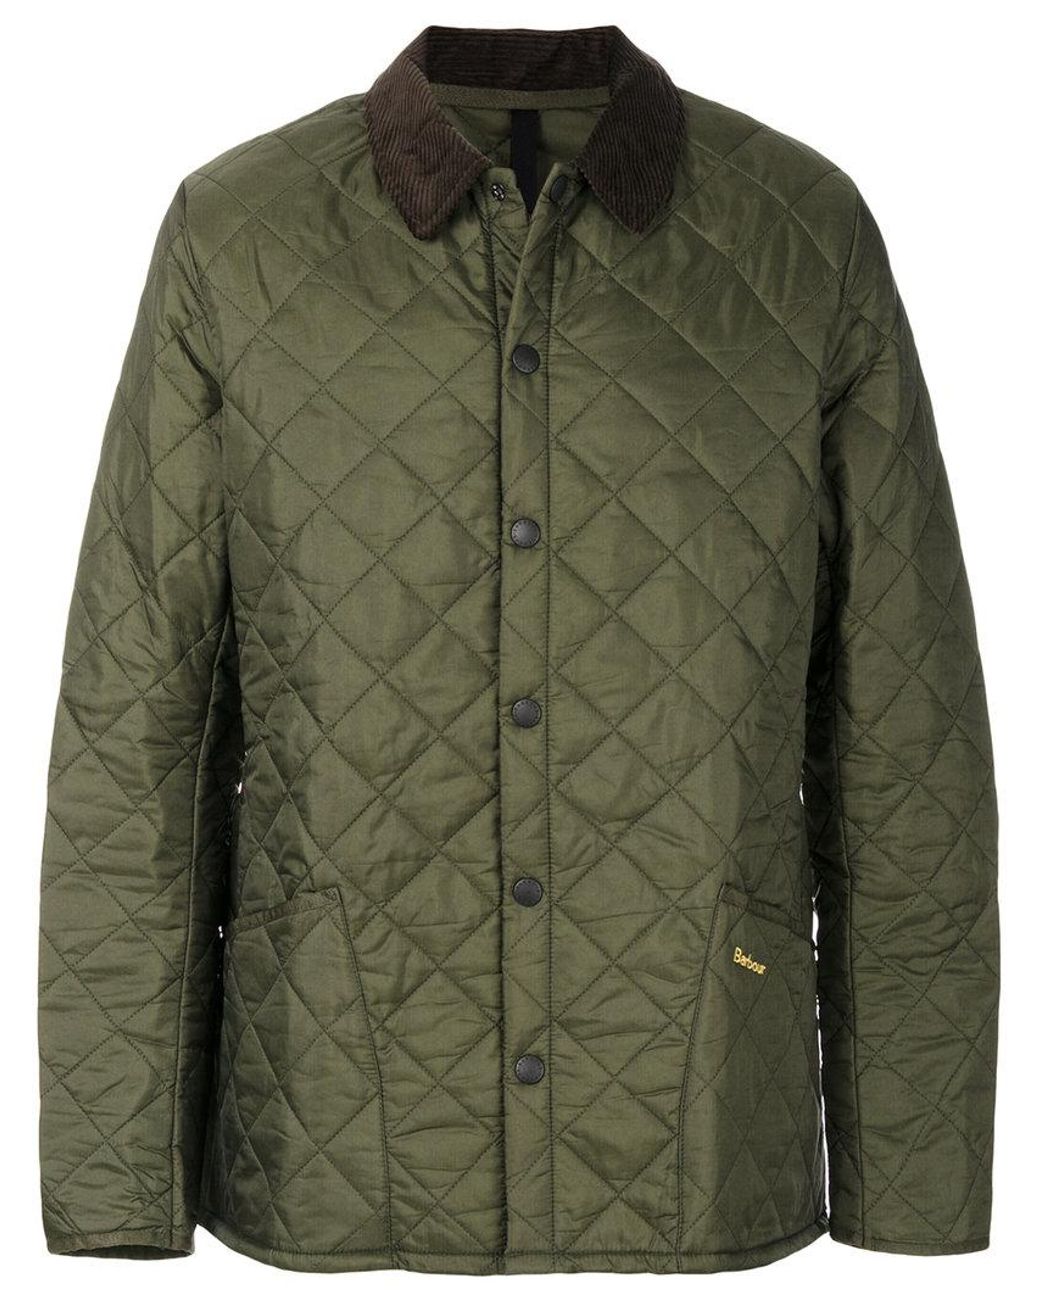 Barbour Heritage Liddesdale Quilted Jacket In Olive in Green for Men - Lyst